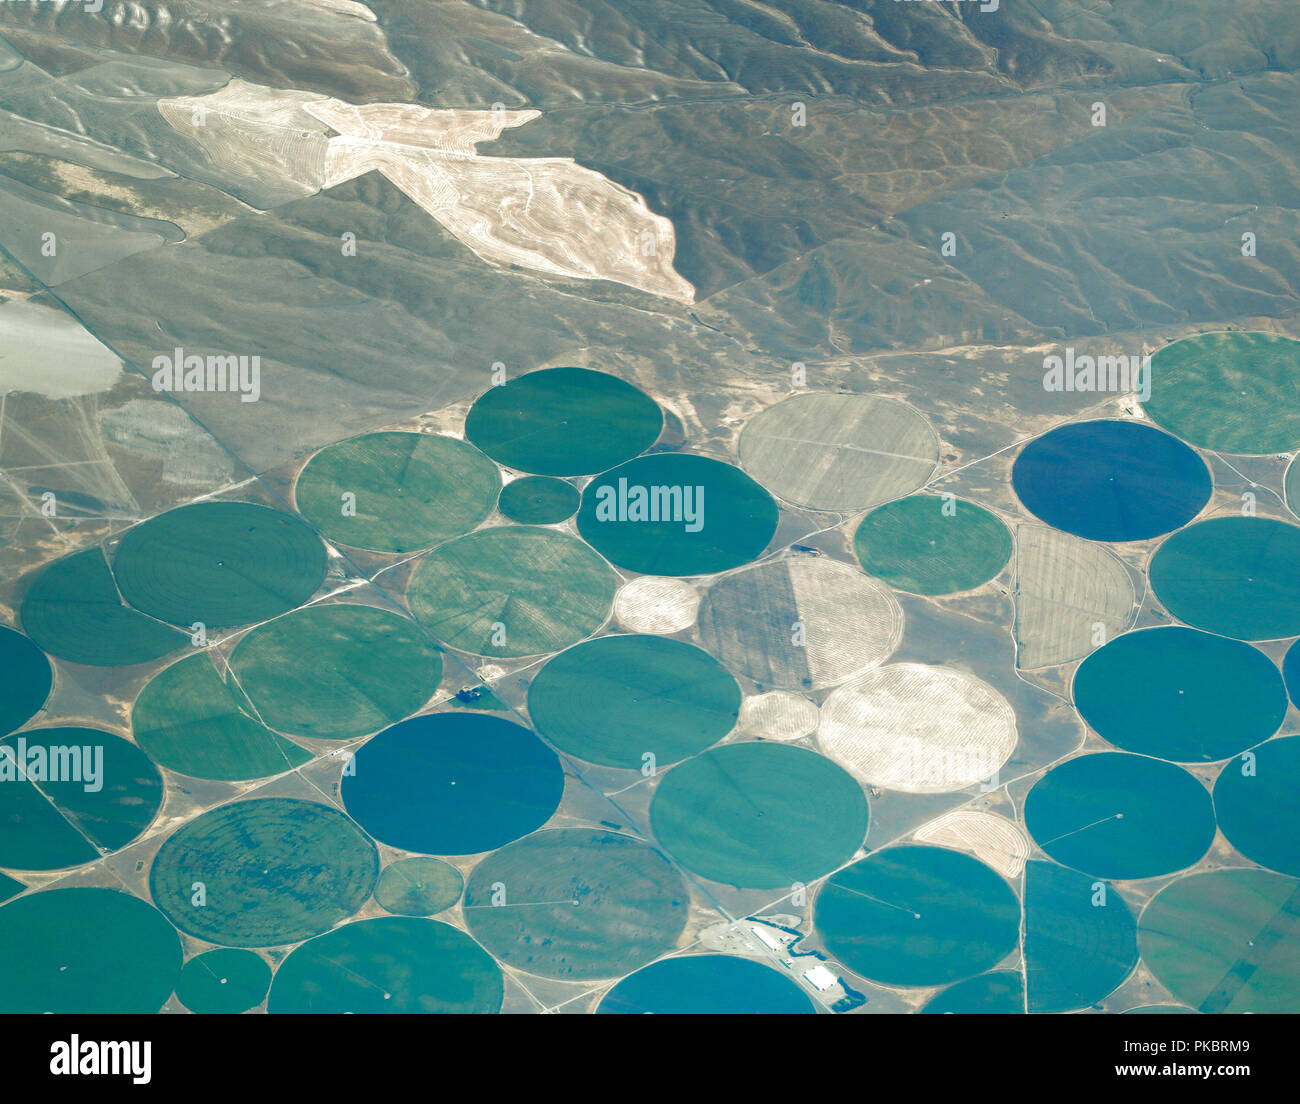 The Earth from above: Center Pivot Irrigation agriculture Stock Photo